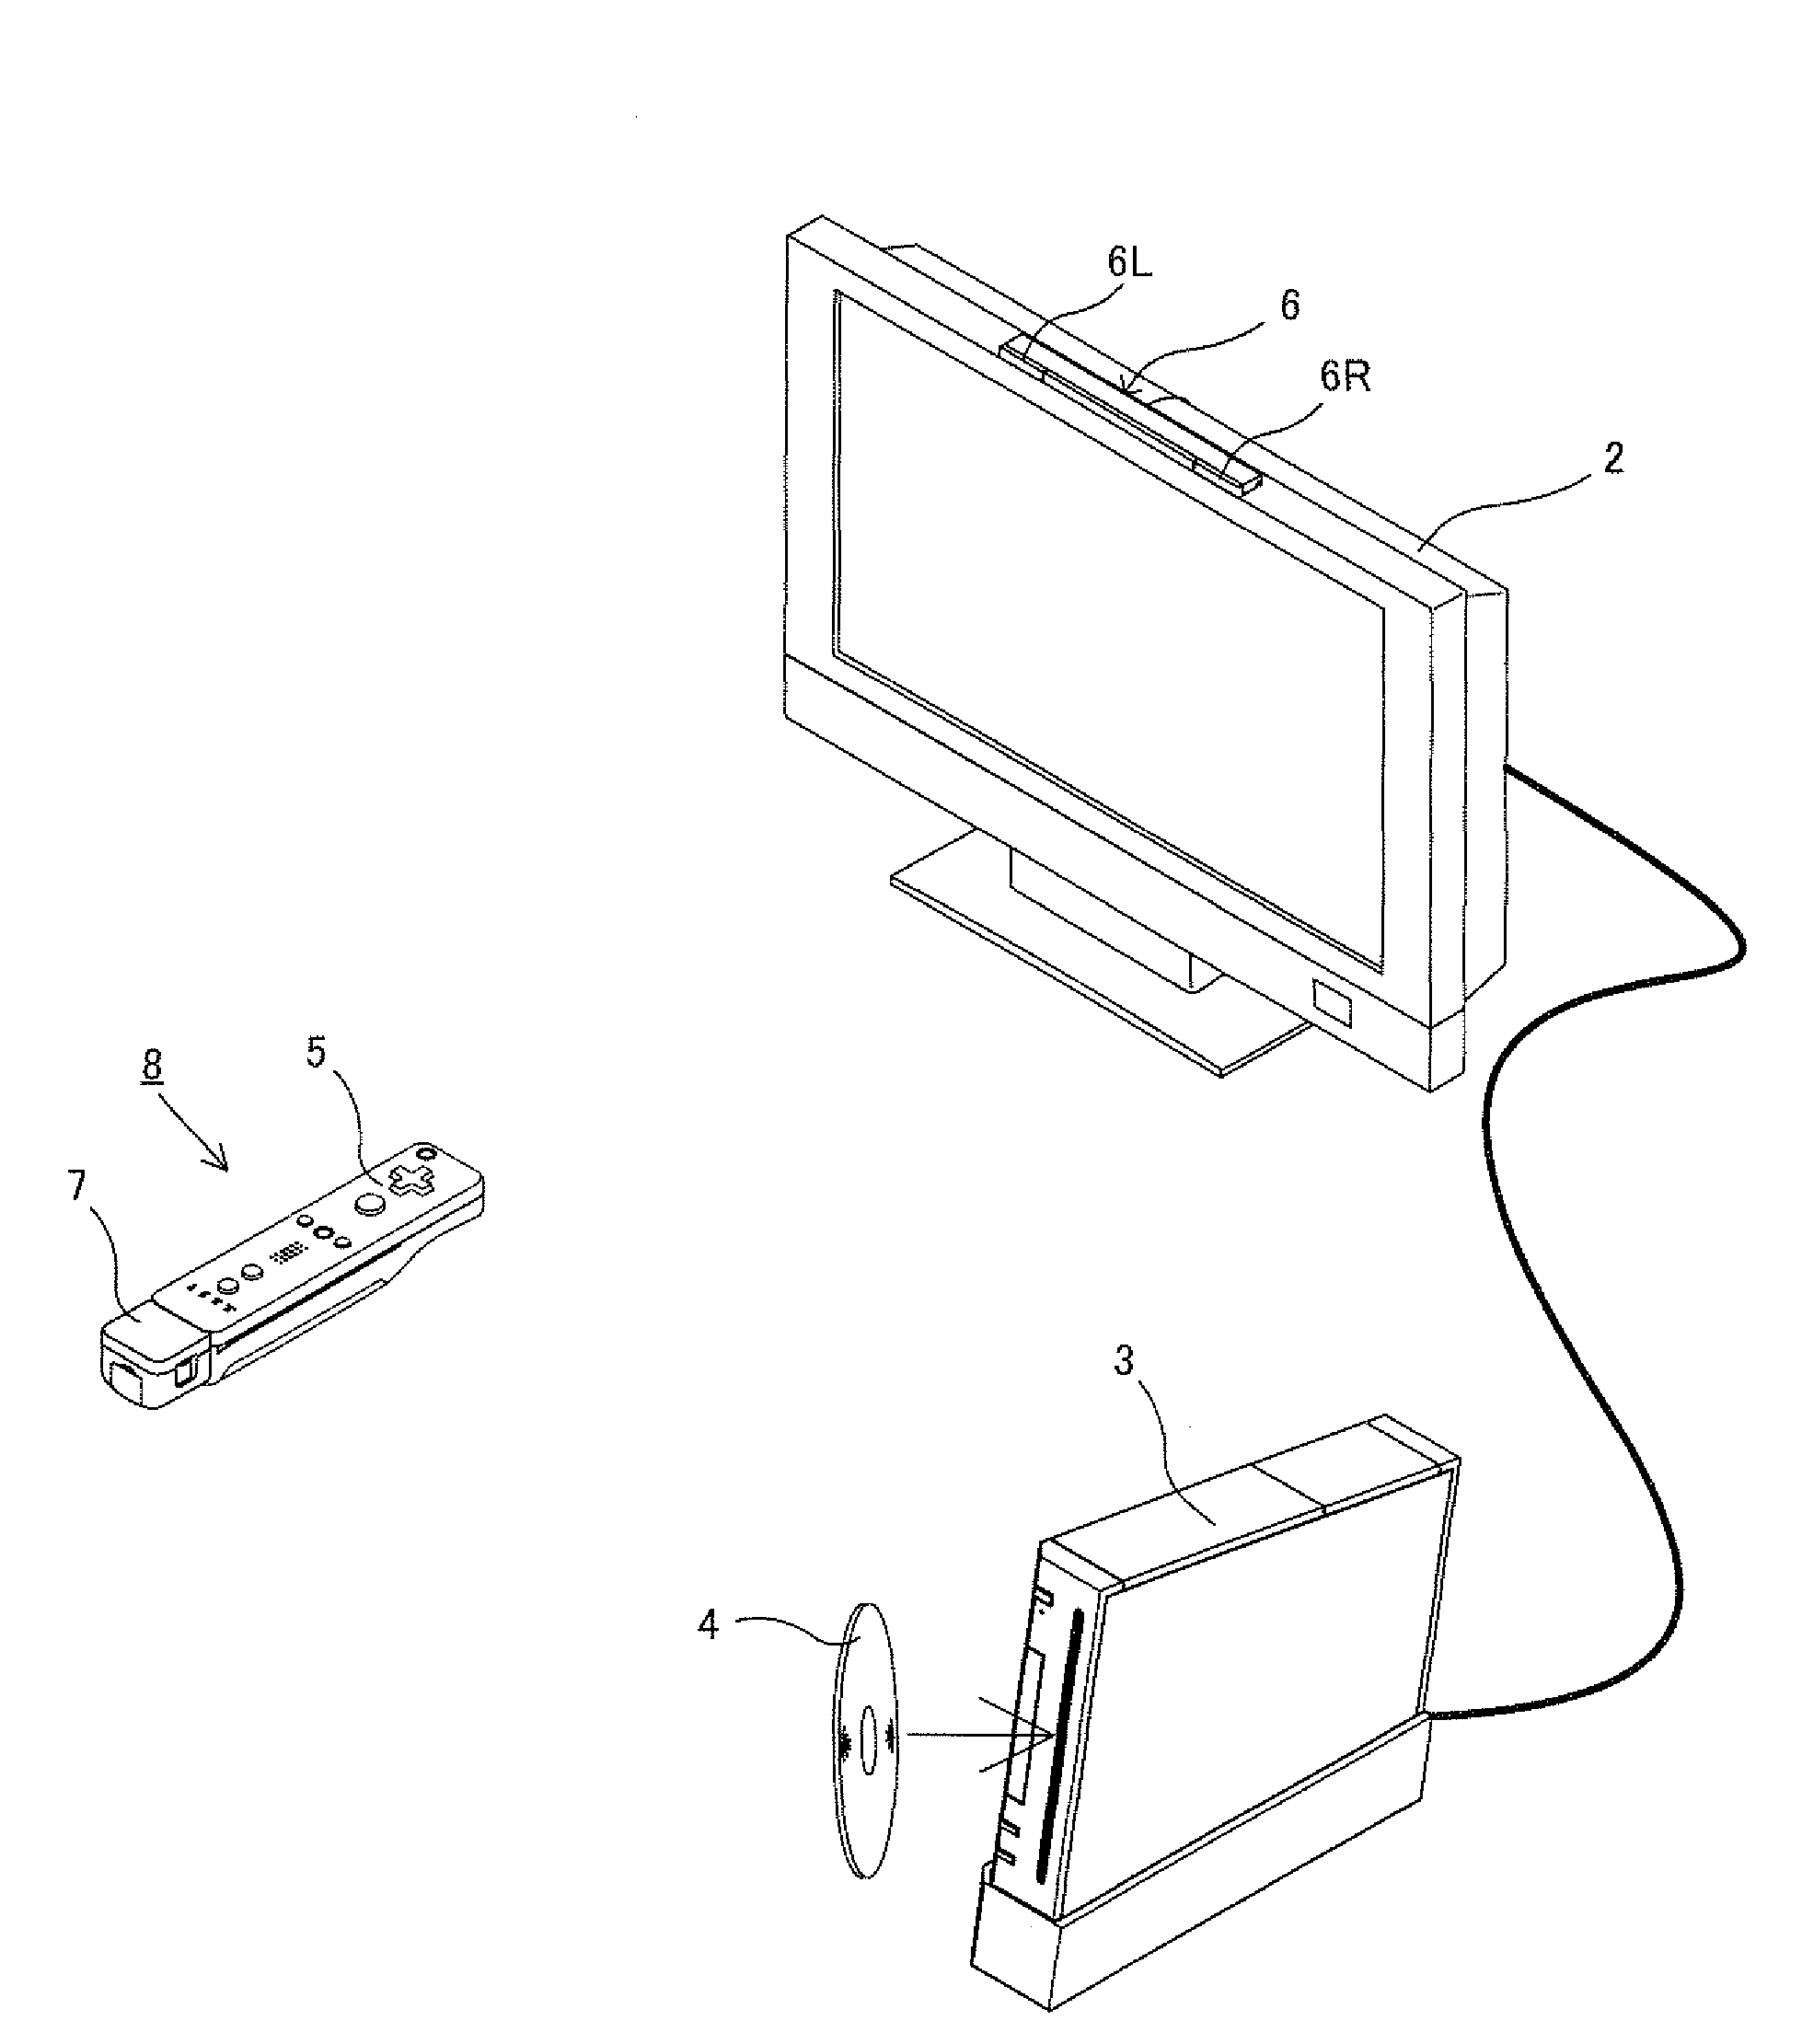 Computer readable storage medium having game program stored thereon and game apparatus